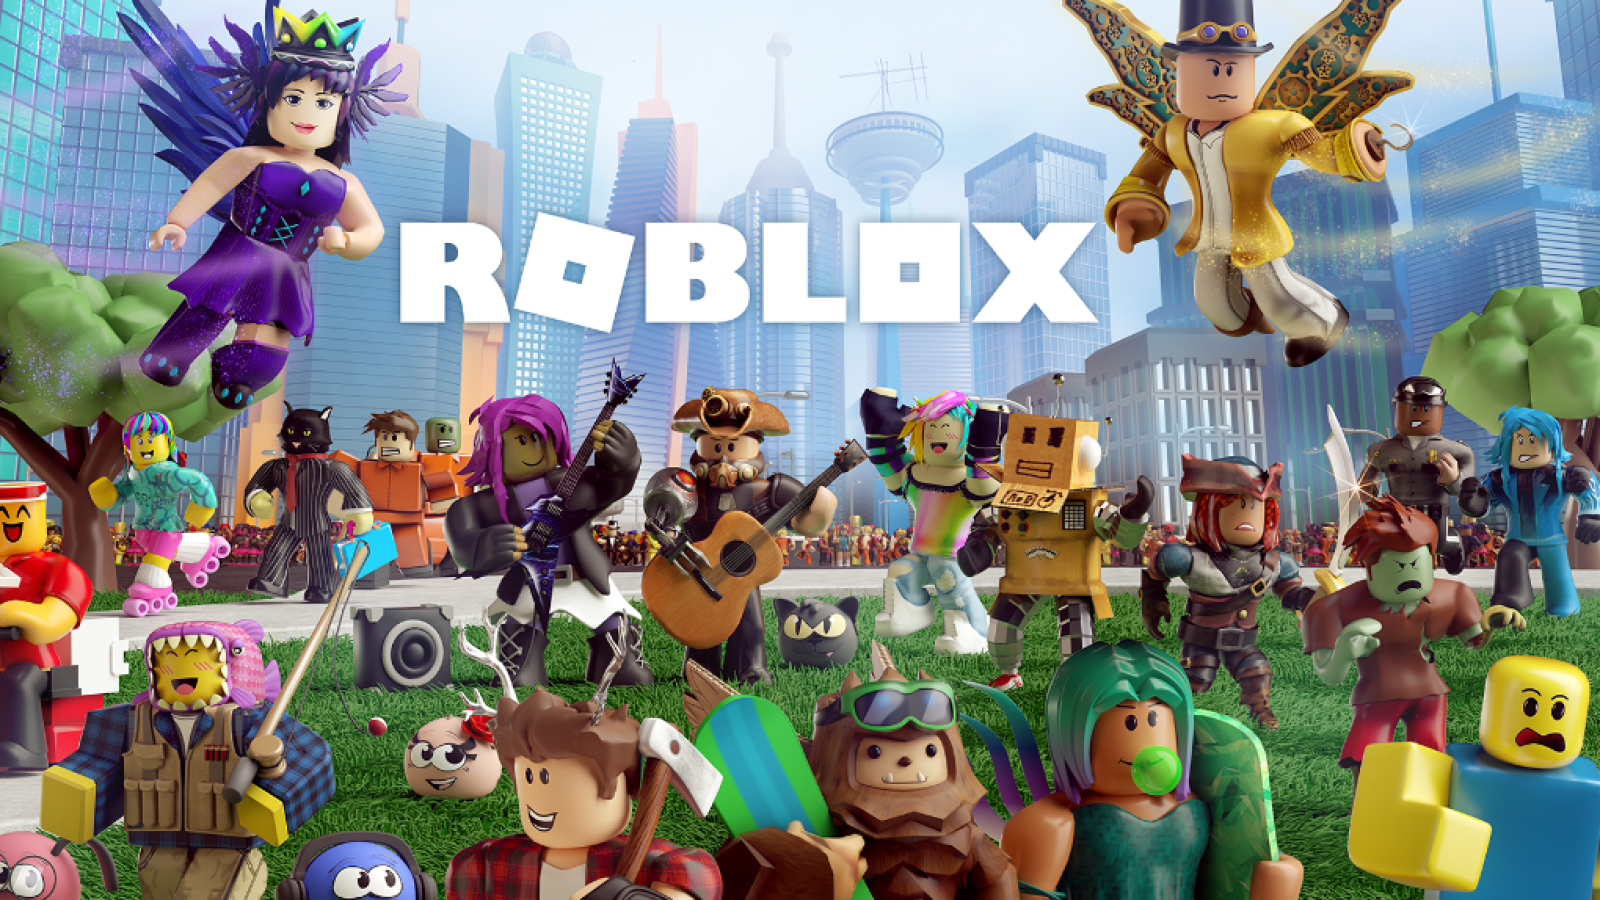 Icamp Online Roblox Classes For Kids - connecticut minecraft or roblox